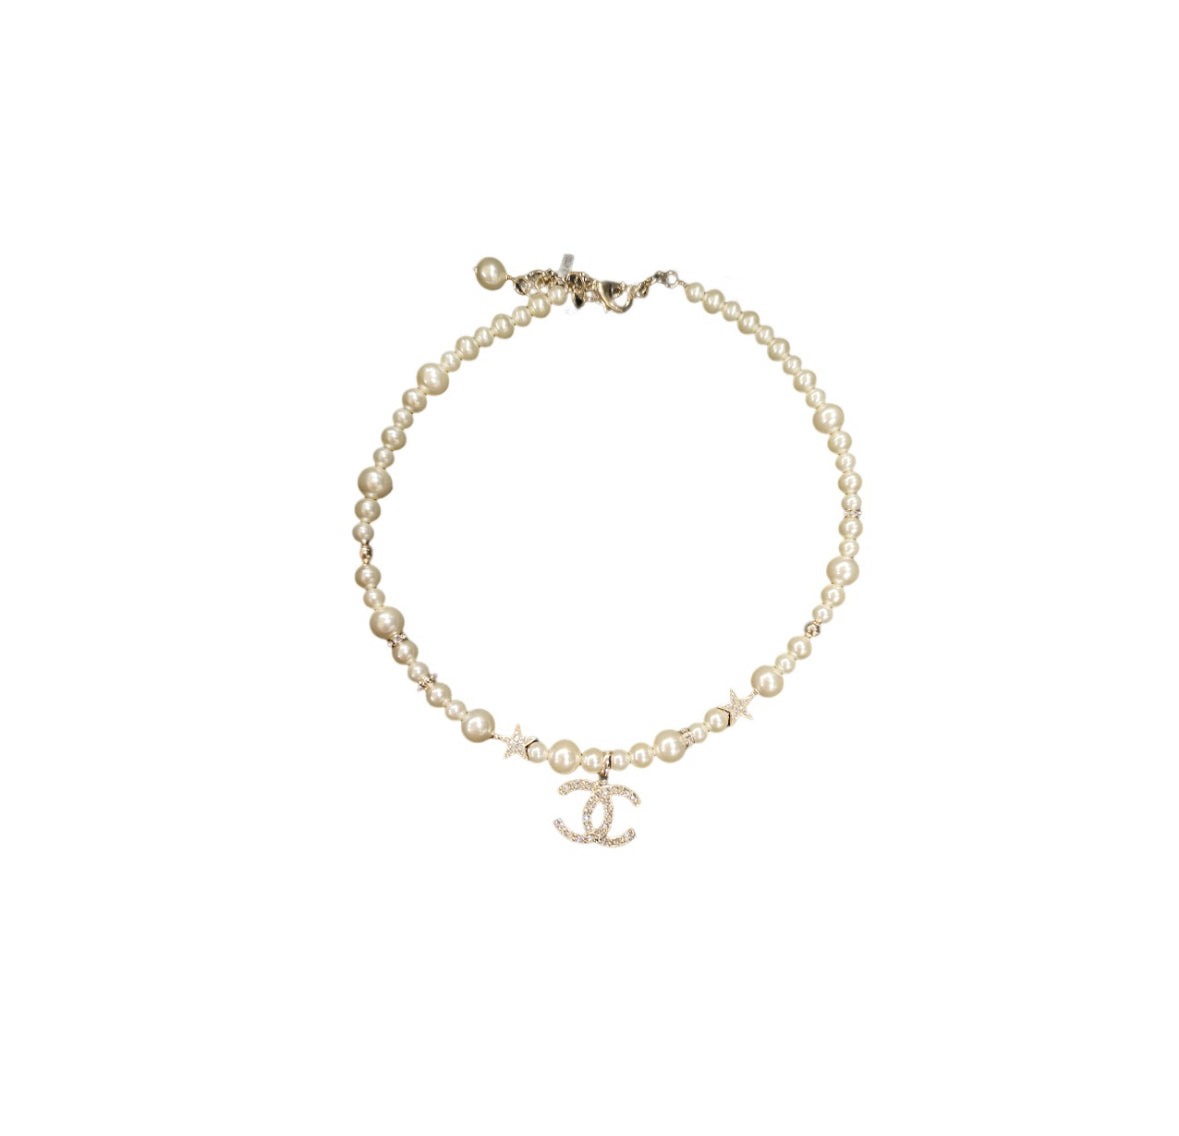 Chanel Double C Logo Necklace “Gold” – Pastor & Co.